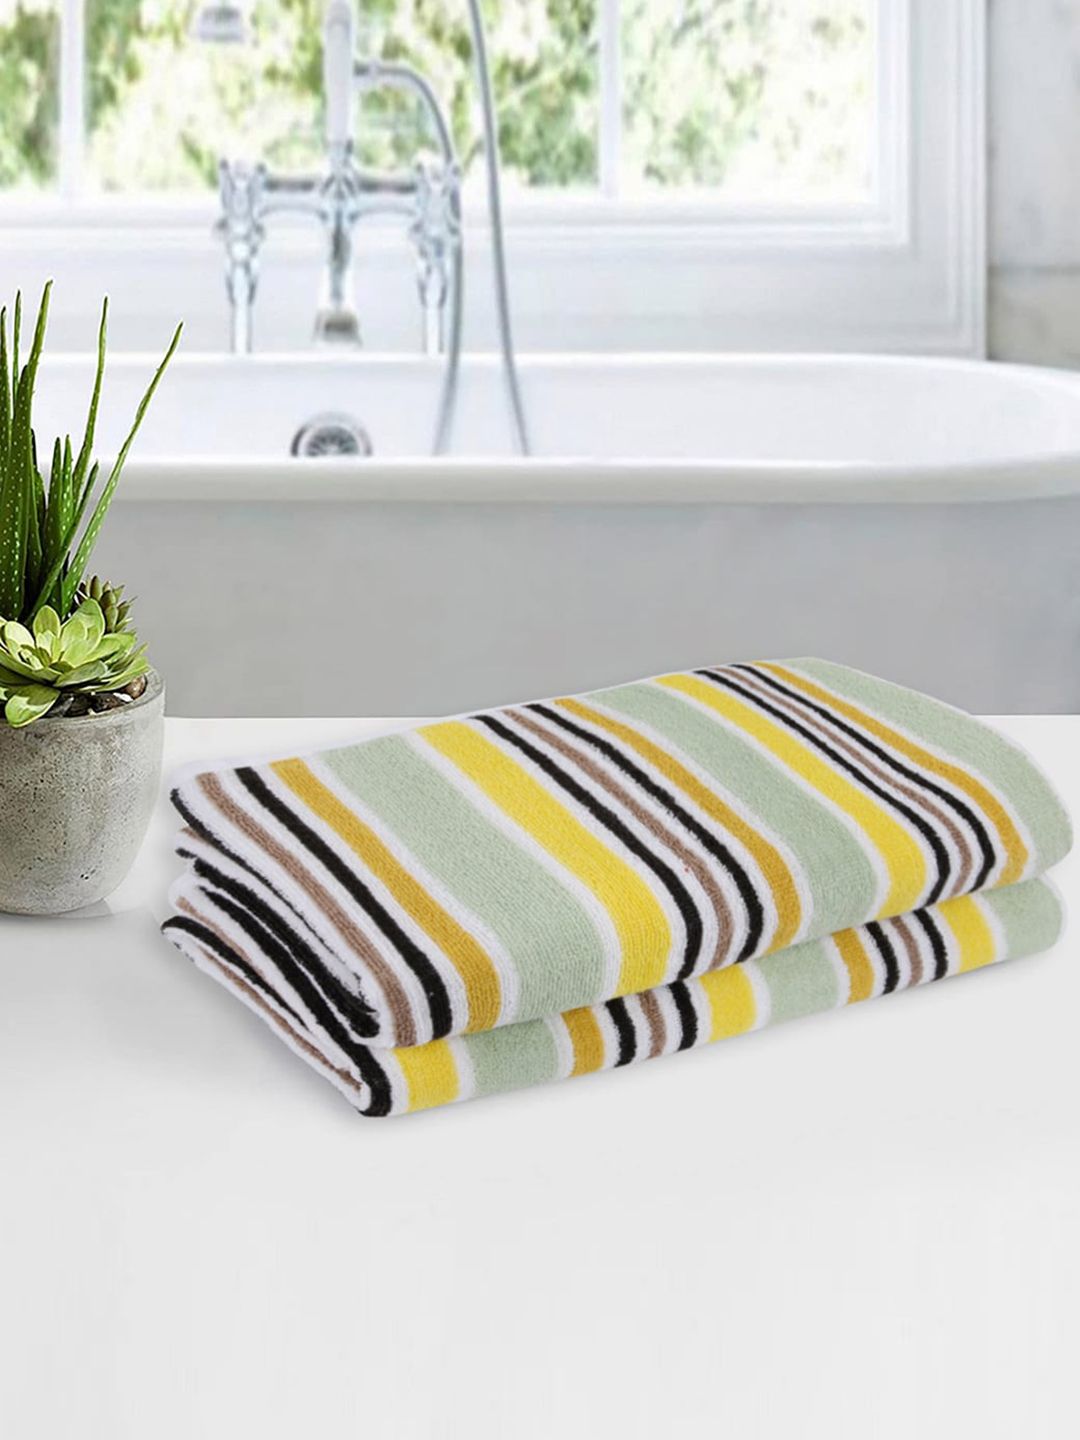 ROMEE Set Of 2 Striped 500GSM Cotton Bath Towels Price in India